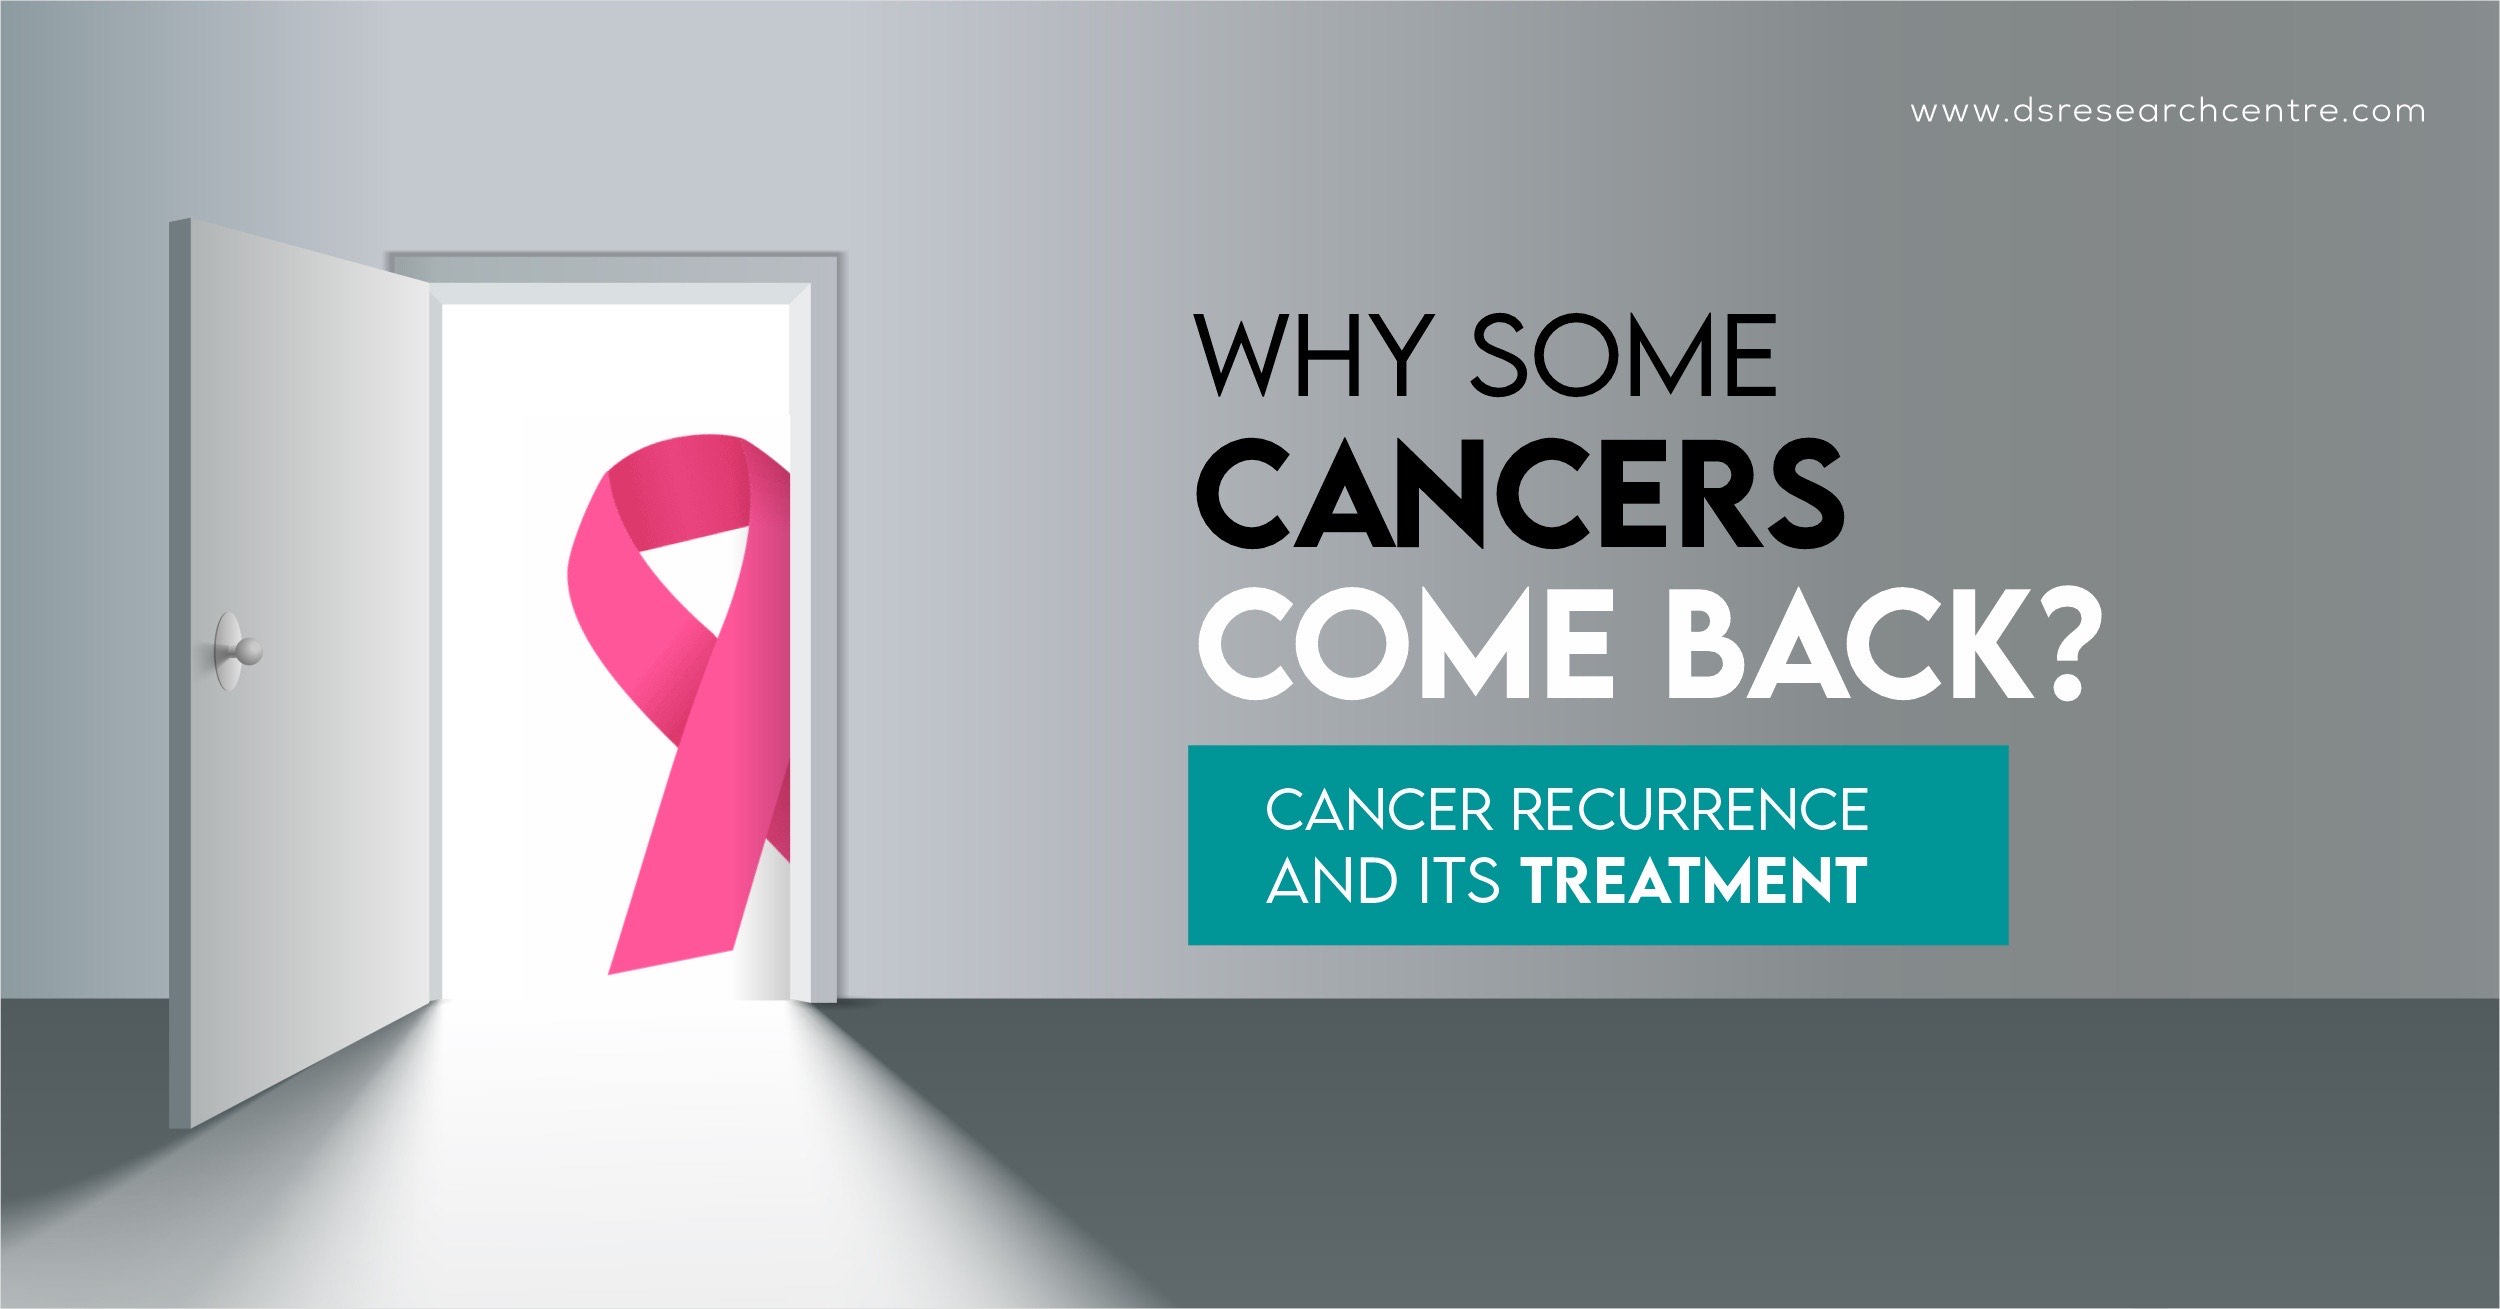 WHY SOME CANCERS COME BACK - CANCER RECURRENCE AND IT'S TREATMENT